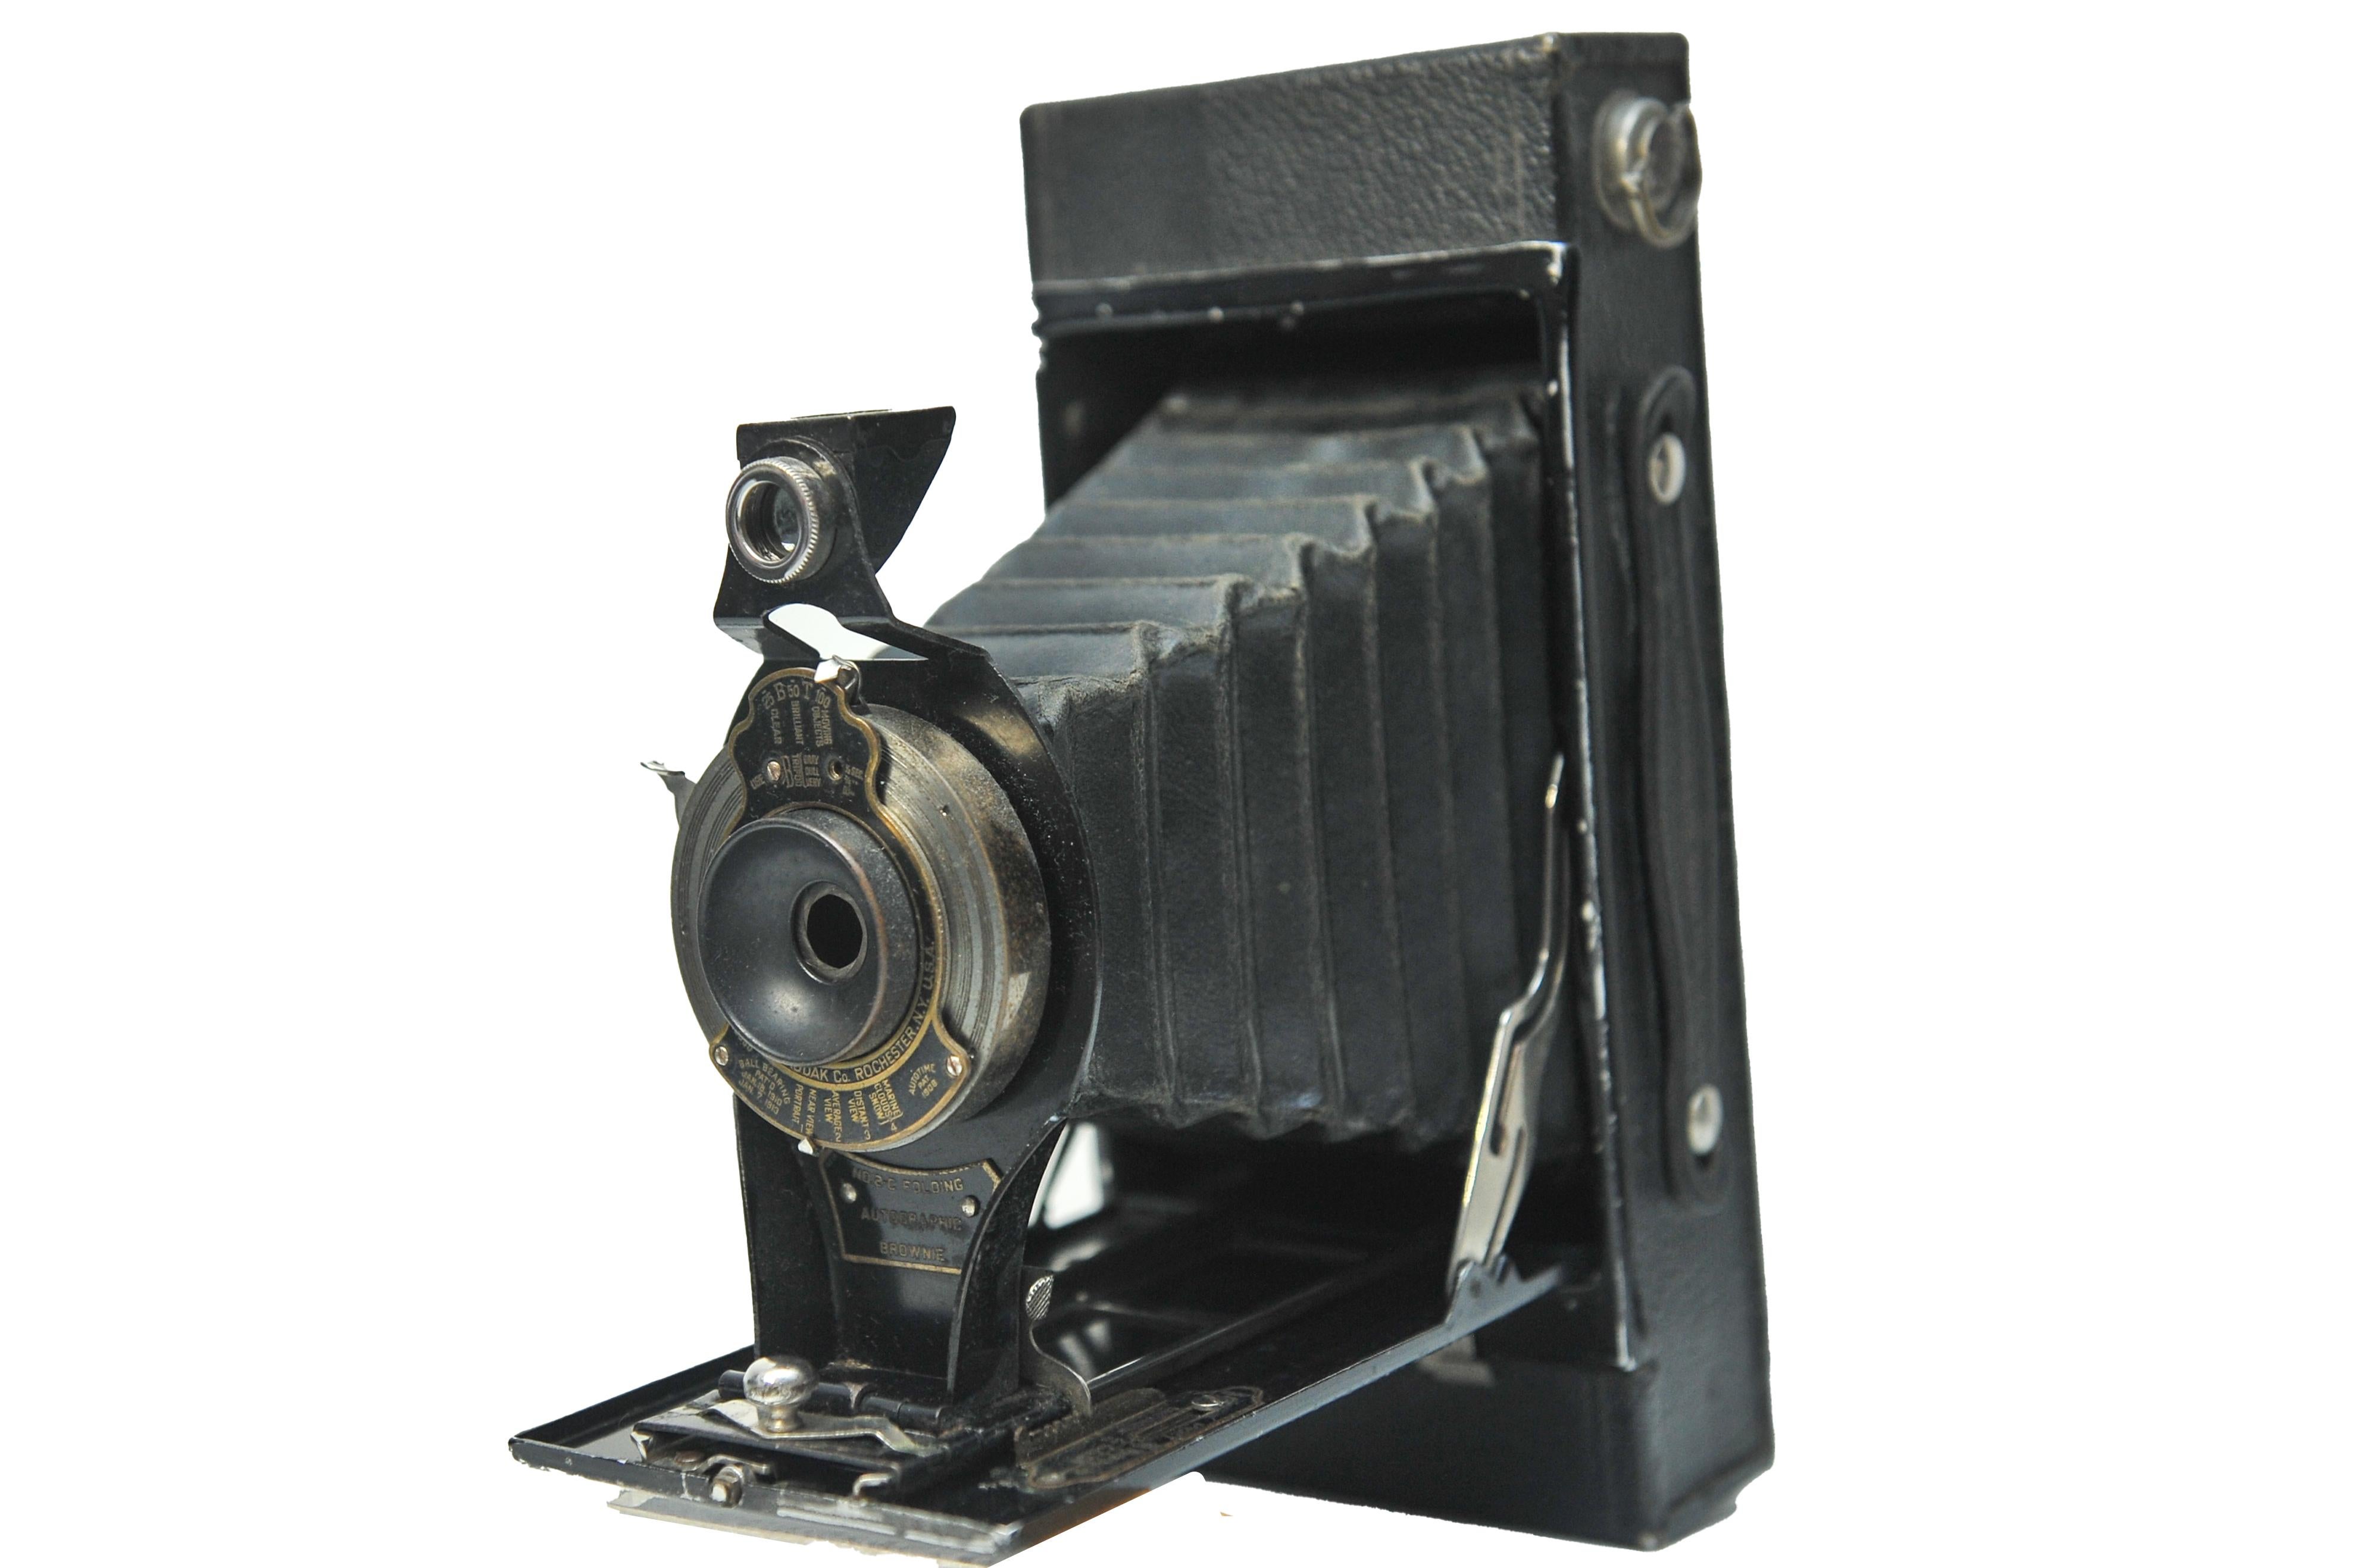 Eastman Kodak Co. Rochester NY USA No. 2C Autographic Brownie Folding Below Camera Within a Rarerered Square Ended Case

Prend 130 Film 

Introduit : Mai 1916
Abandonné : 1926